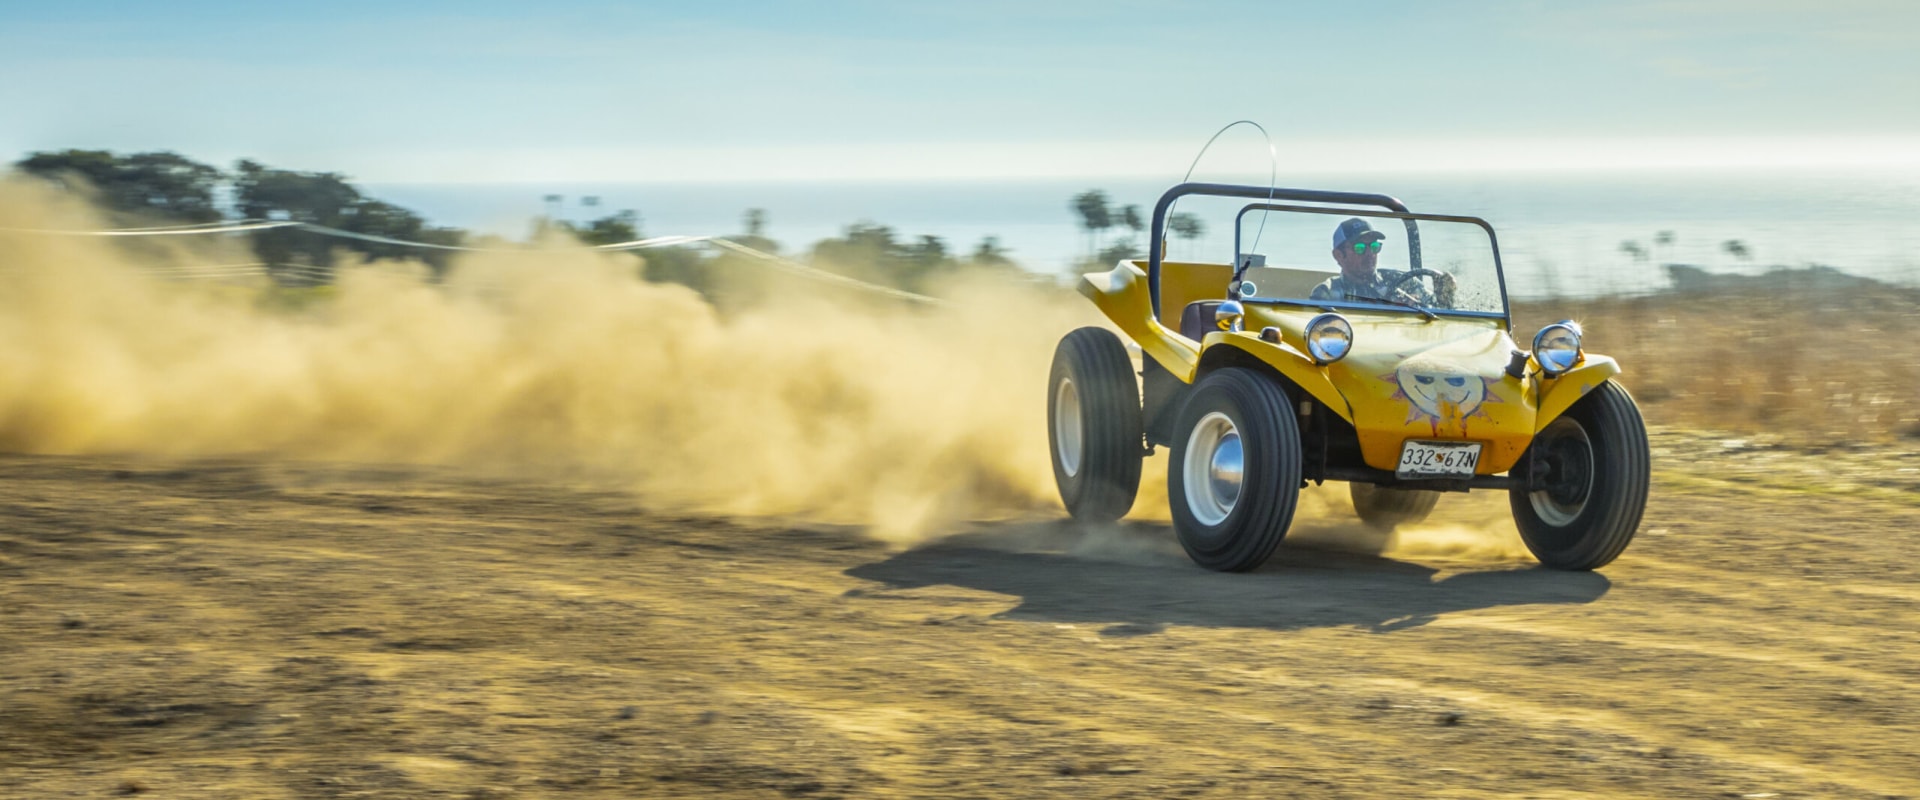 Luxury Sand Cars: Exploring the Different Types and Features